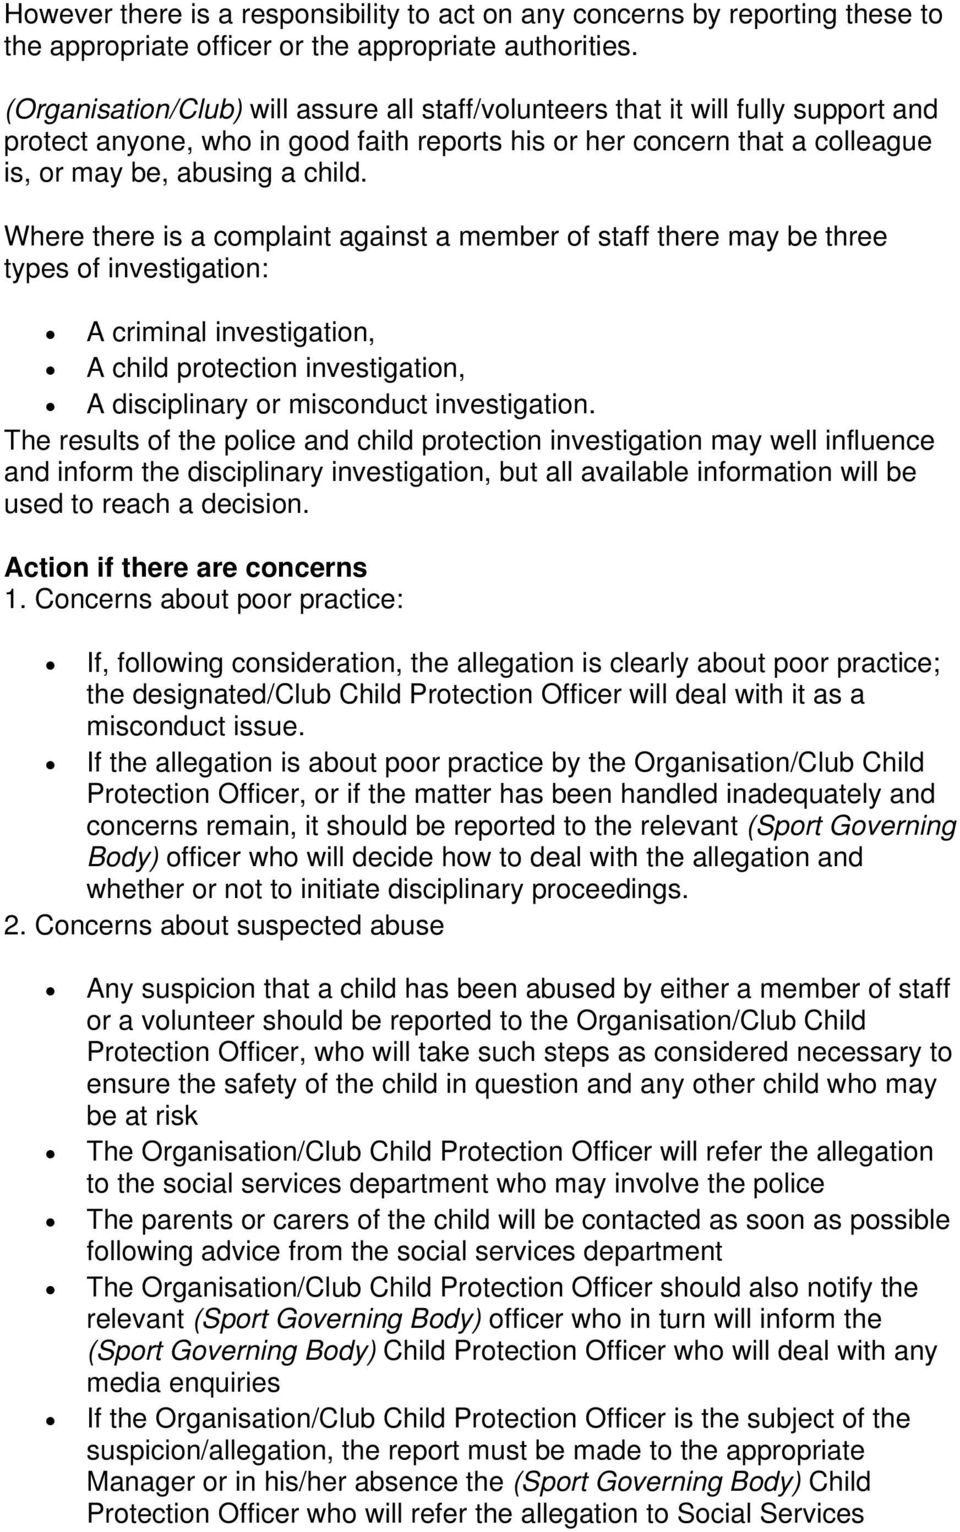 Where there is a complaint against a member of staff there may be three types of investigation: A criminal investigation, A child protection investigation, A disciplinary or misconduct investigation.